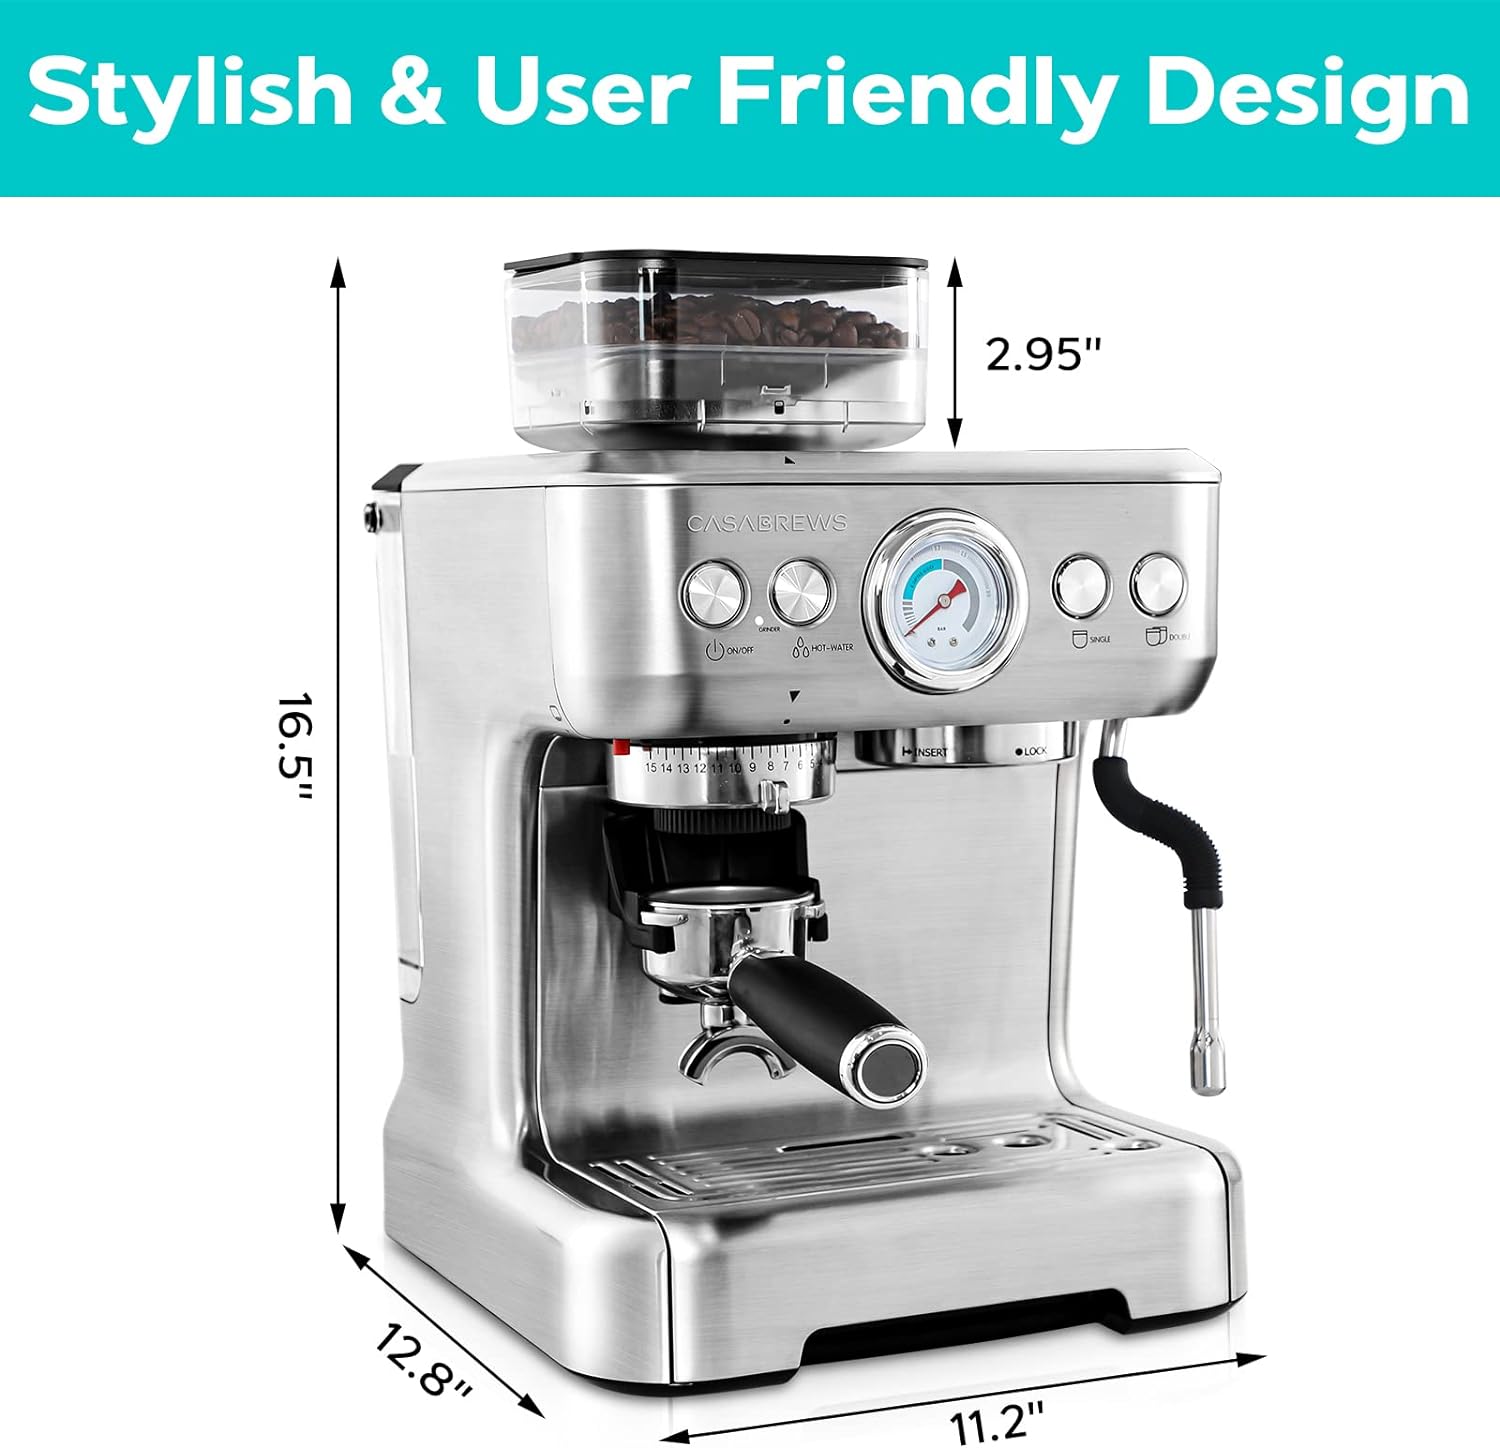 CASABREWS Espresso Machine With Grinder, Professional Espresso Maker With Milk Frother Steam Wand, Barista Latte Machine With Removable Water Tank for Cappuccinos or Macchiatos, Gift for Mom Dad